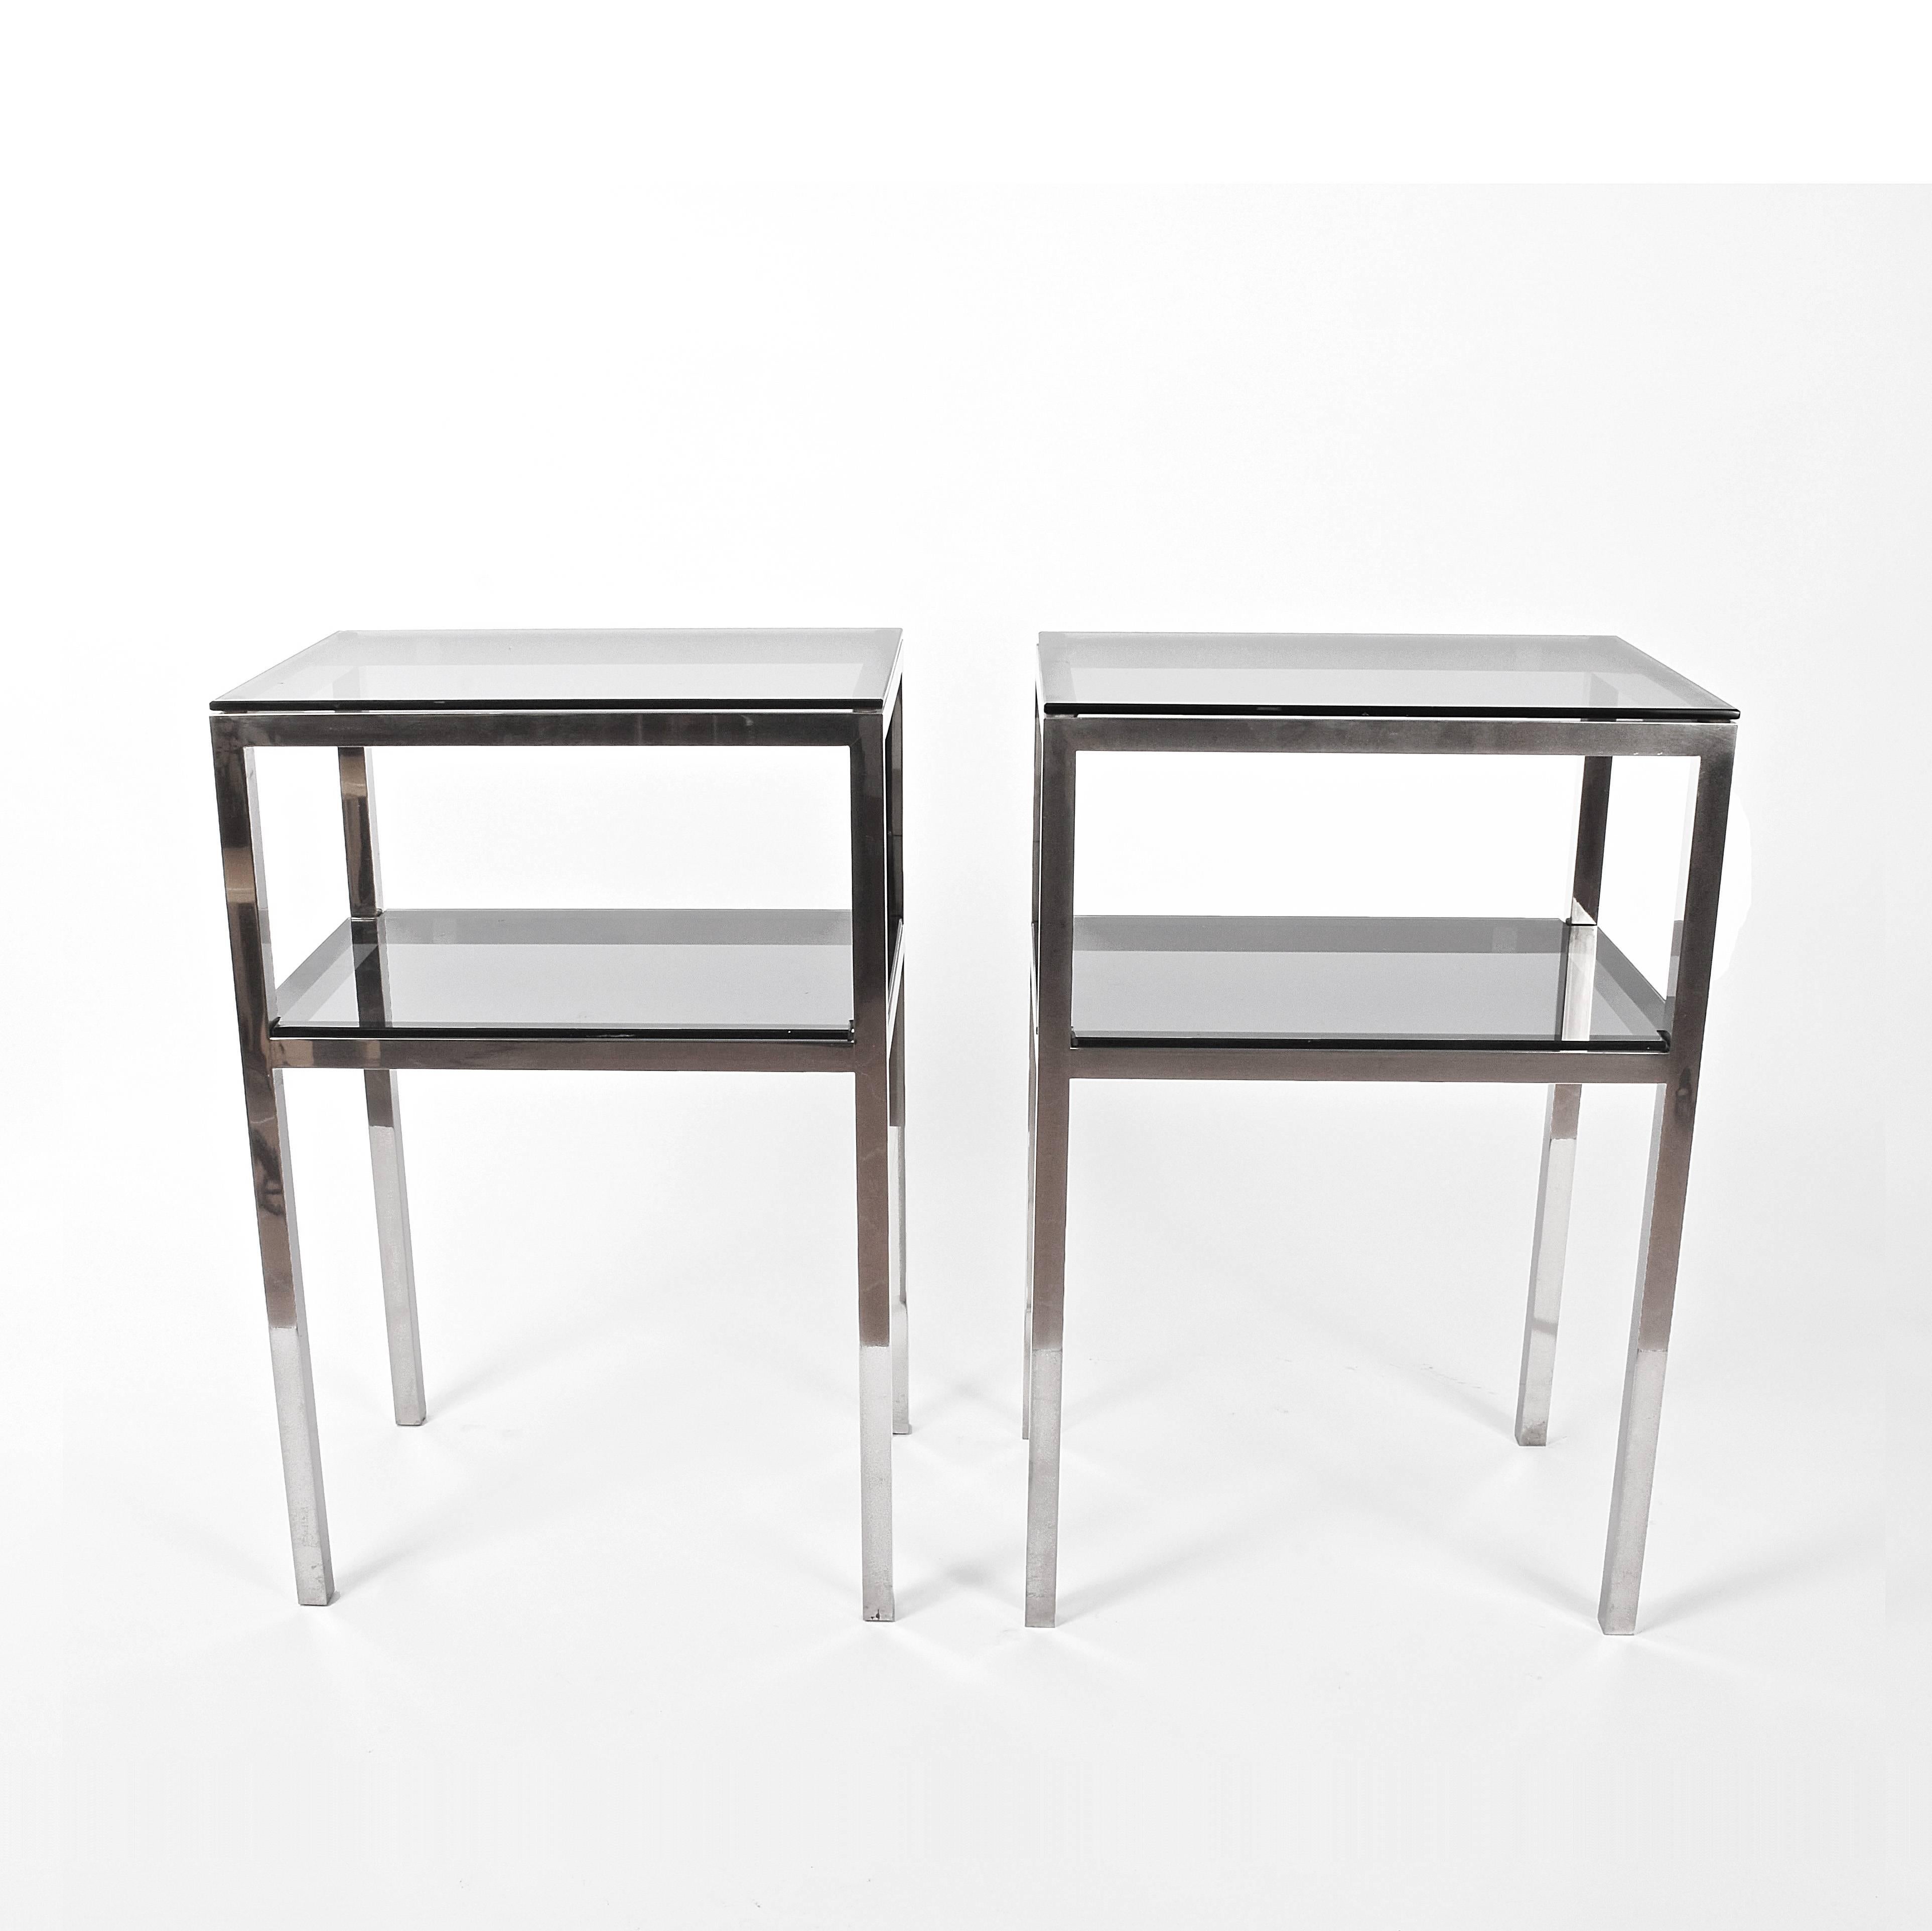 Pair of midcentury two-level accent tables attributed to Romeo Rega
Chrome and smoked glass.